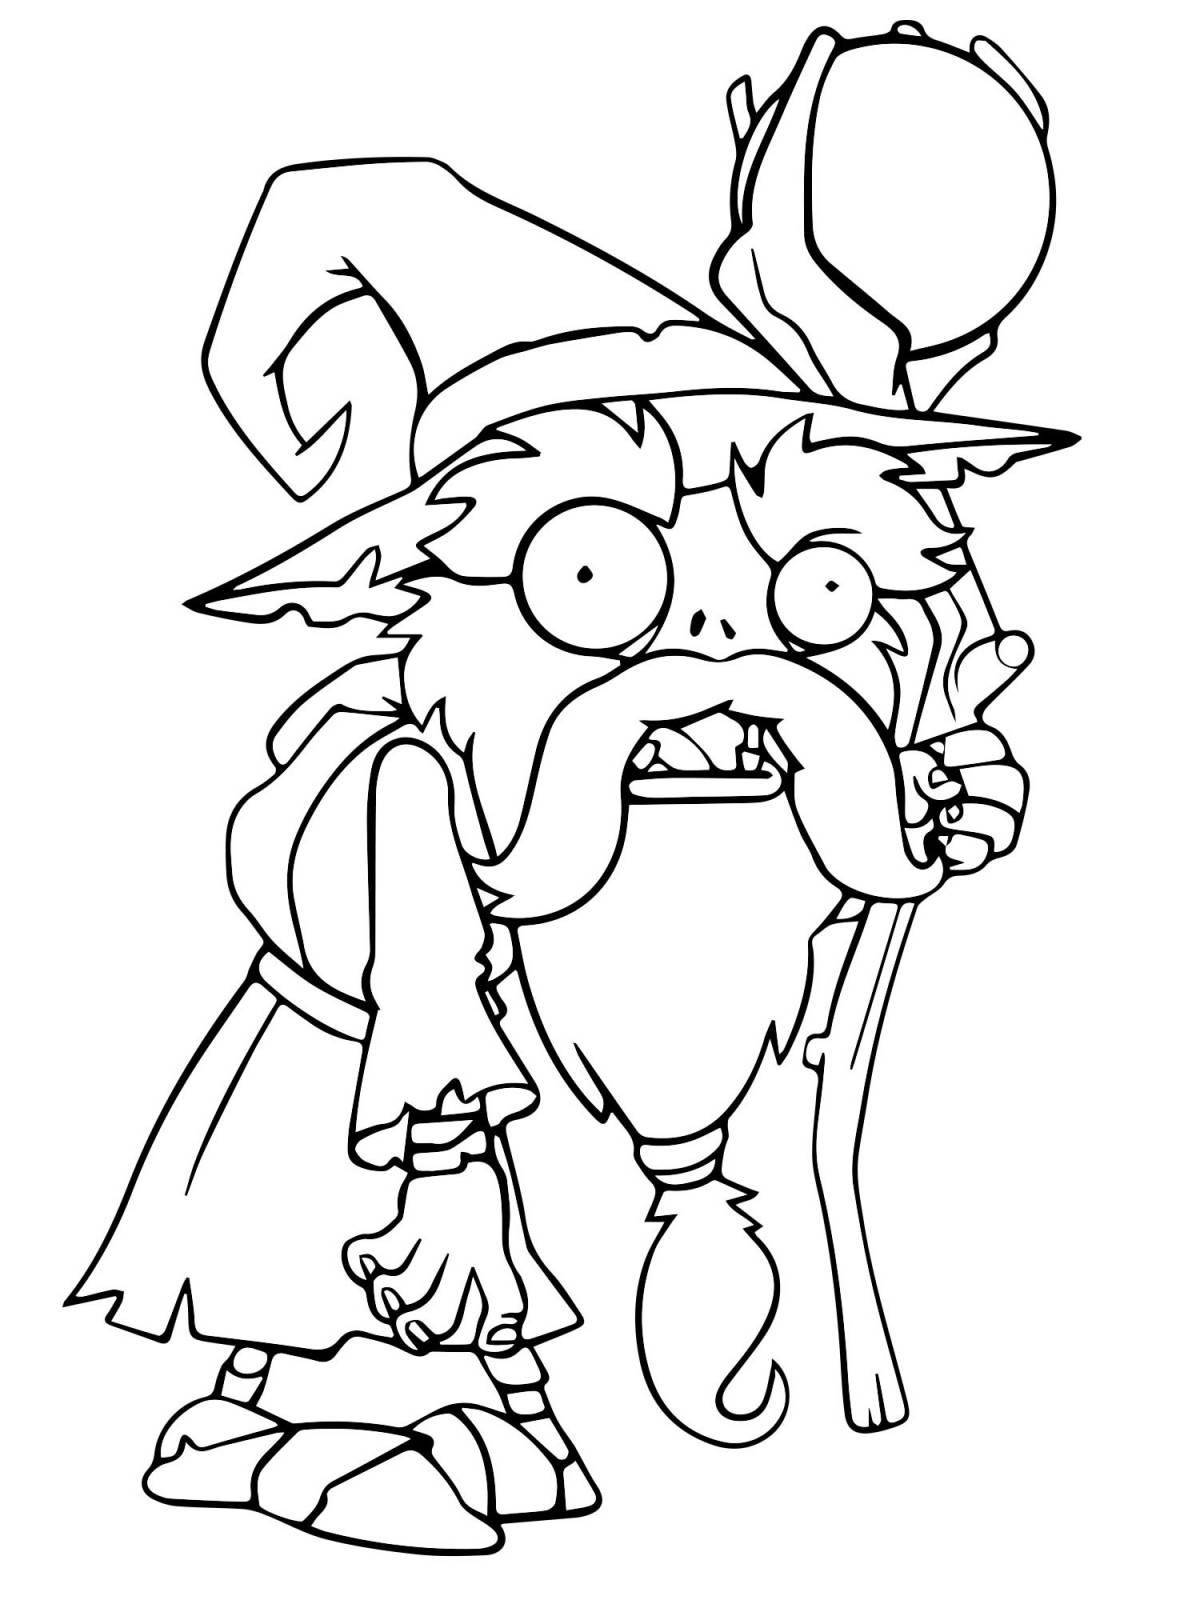 Unwanted zombie coloring page